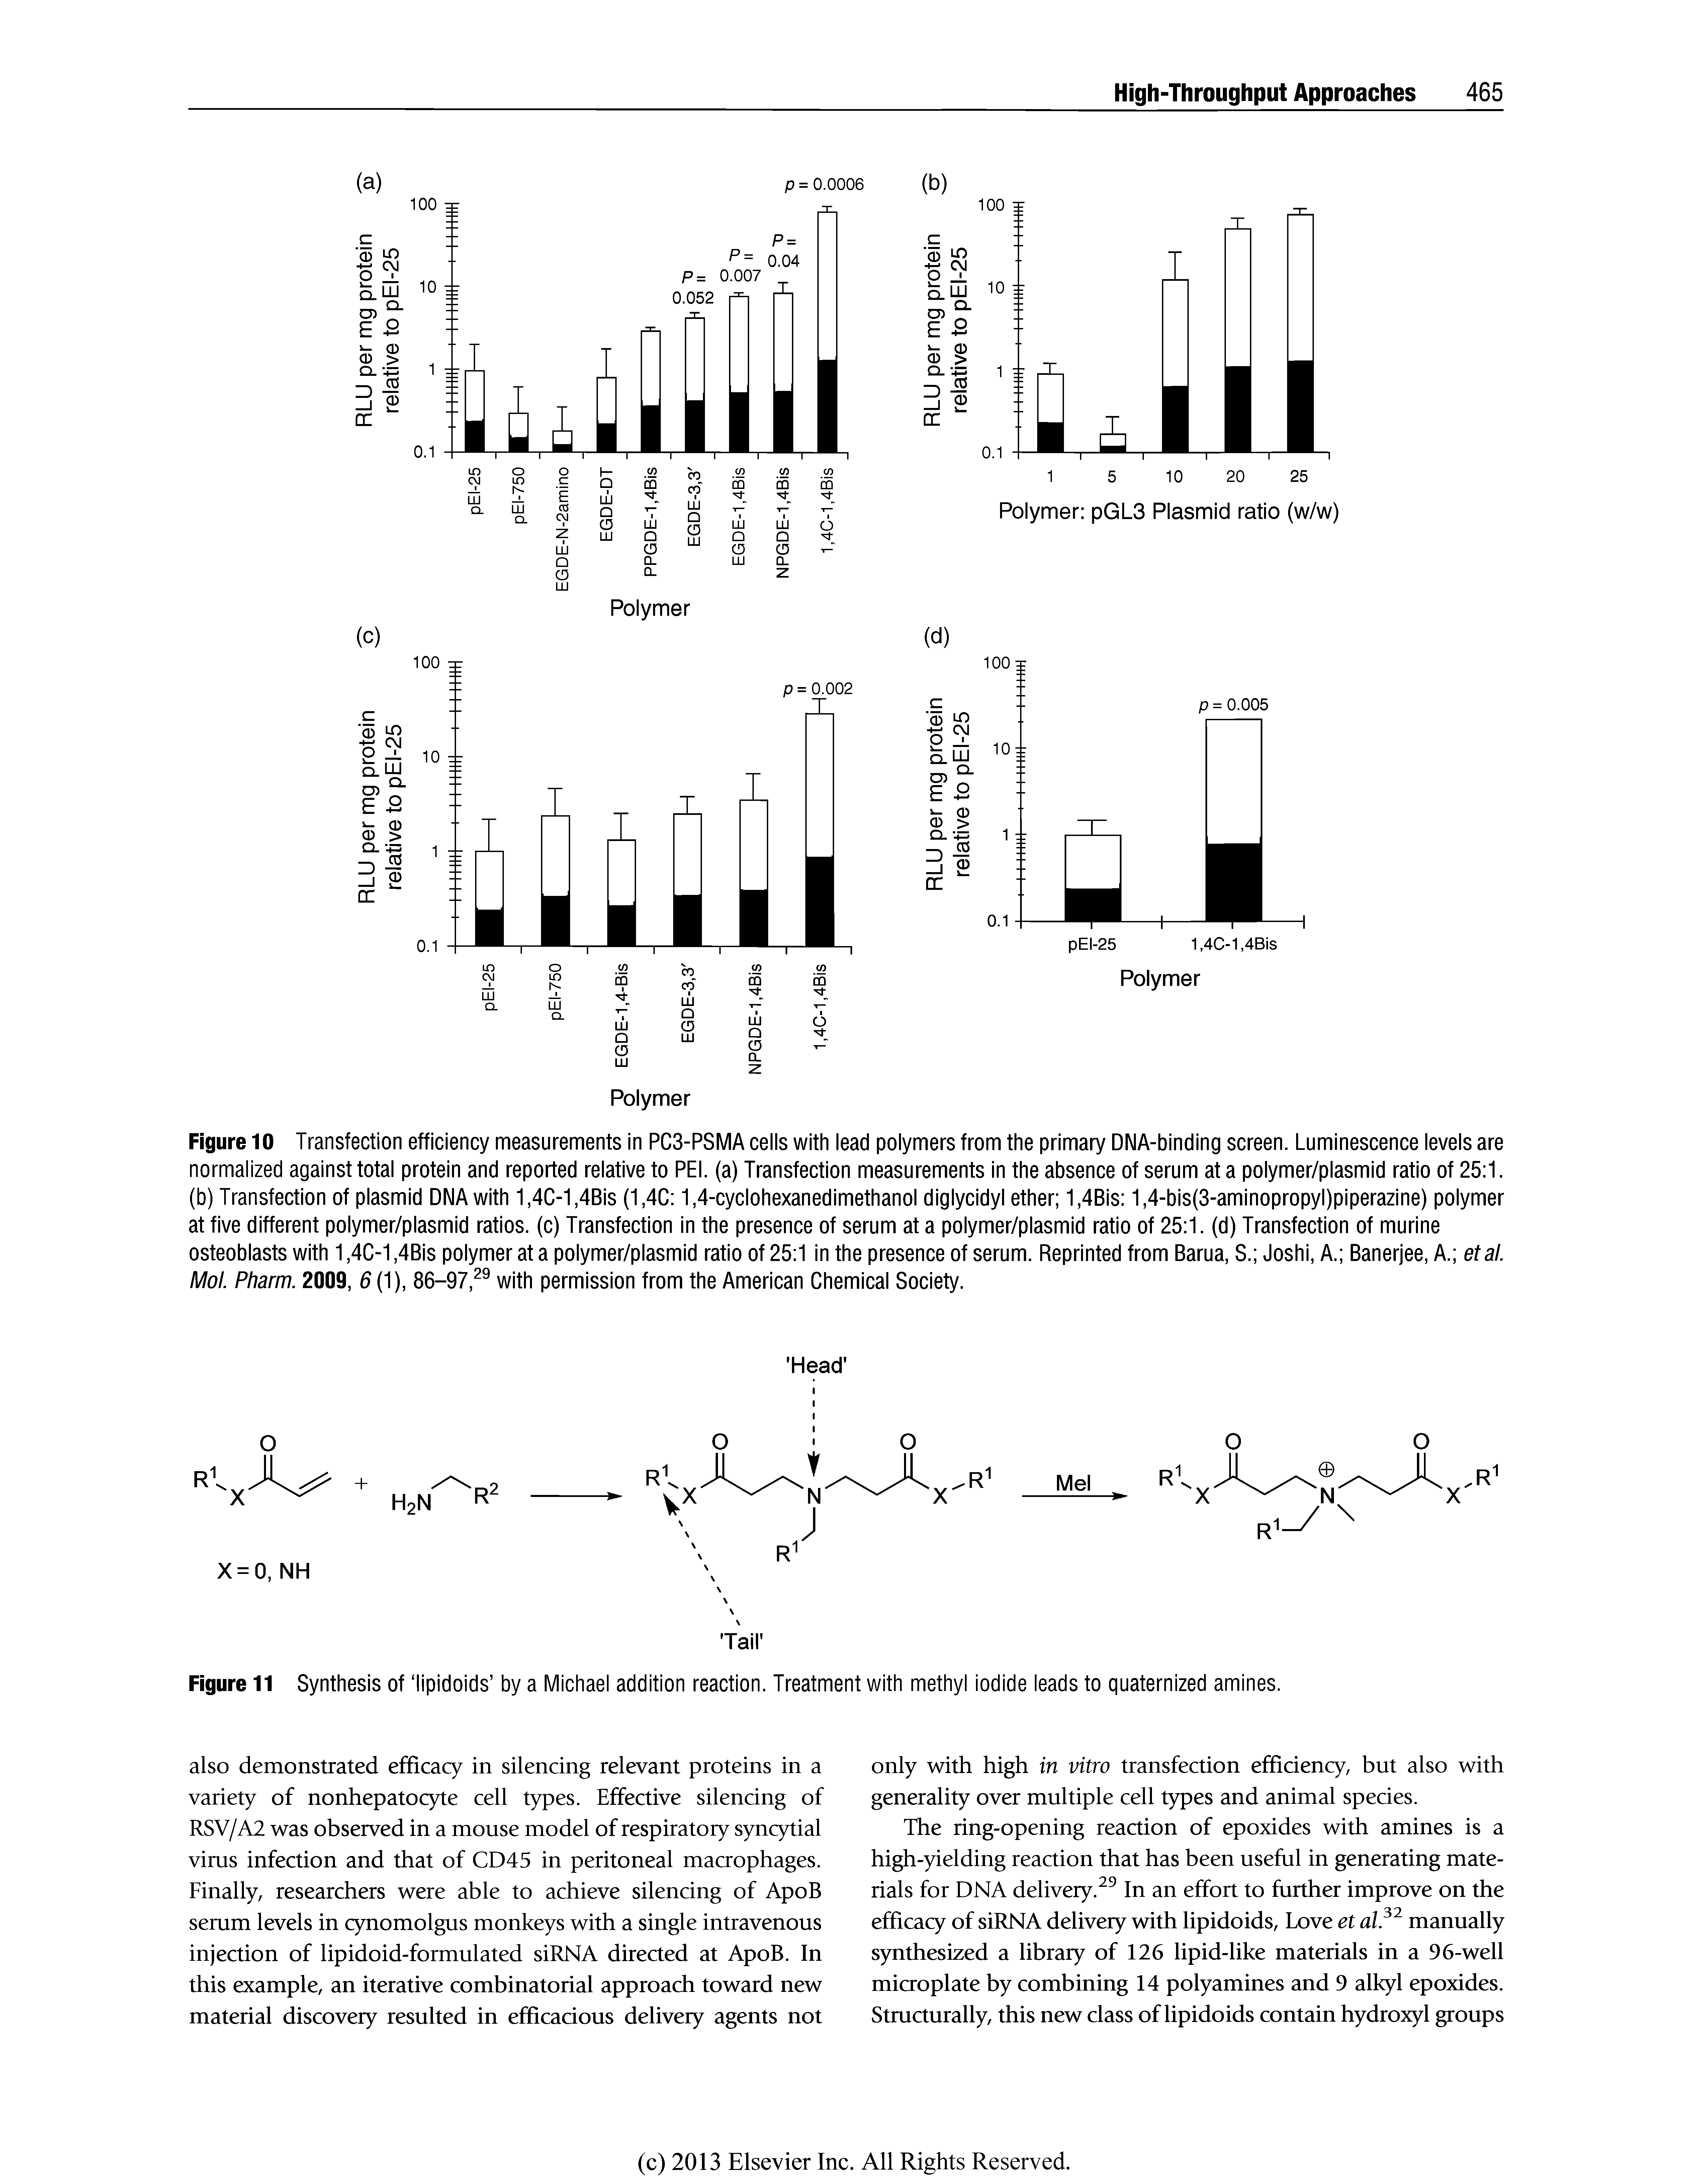 Figure 10 Transfection efficiency measurements in PC3-PSMA cells with lead polymers from the primary DNA-binding screen. Luminescence levels are normalized against total protein and reported relative to PEI. (a) Transfection measurements in the absence of serum at a polymer/plasmid ratio of 25 1. (b) Transfection of plasmid DNA with 1,4C-1,4Bis (1,4C 1,4-cyclohexanedimethanol diglycidyl ether 1,4Bis 1,4-bis(3-aminopropyl)piperazine) polymer at five different polymer/plasmid ratios, (c) Transfection in the presence of serum at a polymer/plasmid ratio of 25 1. (d) Transfection of murine osteoblasts with 1,4C-1,4Bis polymer at a polymer/plasmid ratio of 25 1 in the presence of serum. Reprinted from Barua, S. Joshi, A. Banerjee, A. etal. Mol. Pham. 2009, 6 (1), 86-97, with permission from the American Chemical Society.